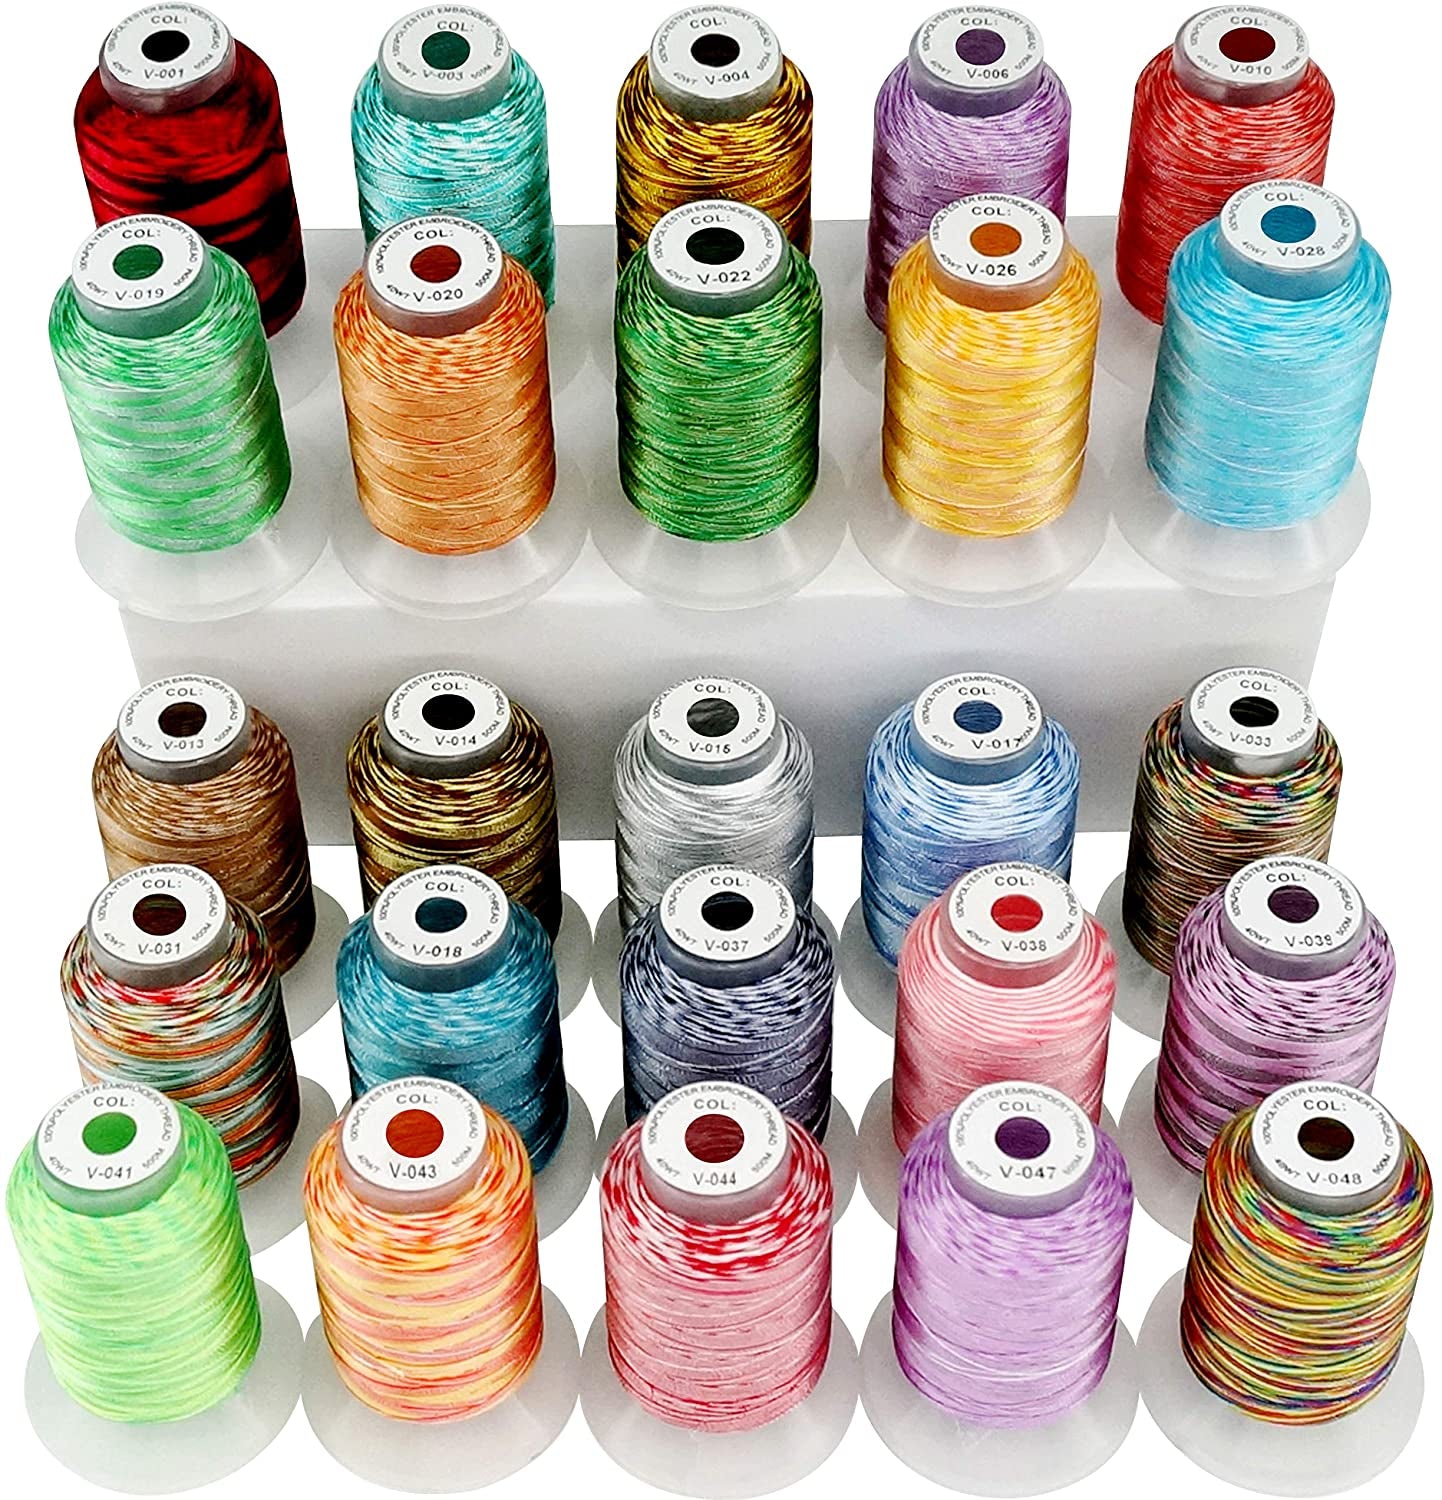 25 Colors Variegated Polyester Embroidery Machine Thread Kit 500M (550Y) Each Spool for Brother Janome Babylock Singer Pfaff Bernina Husqvaran Embroidery and Sewing Machines